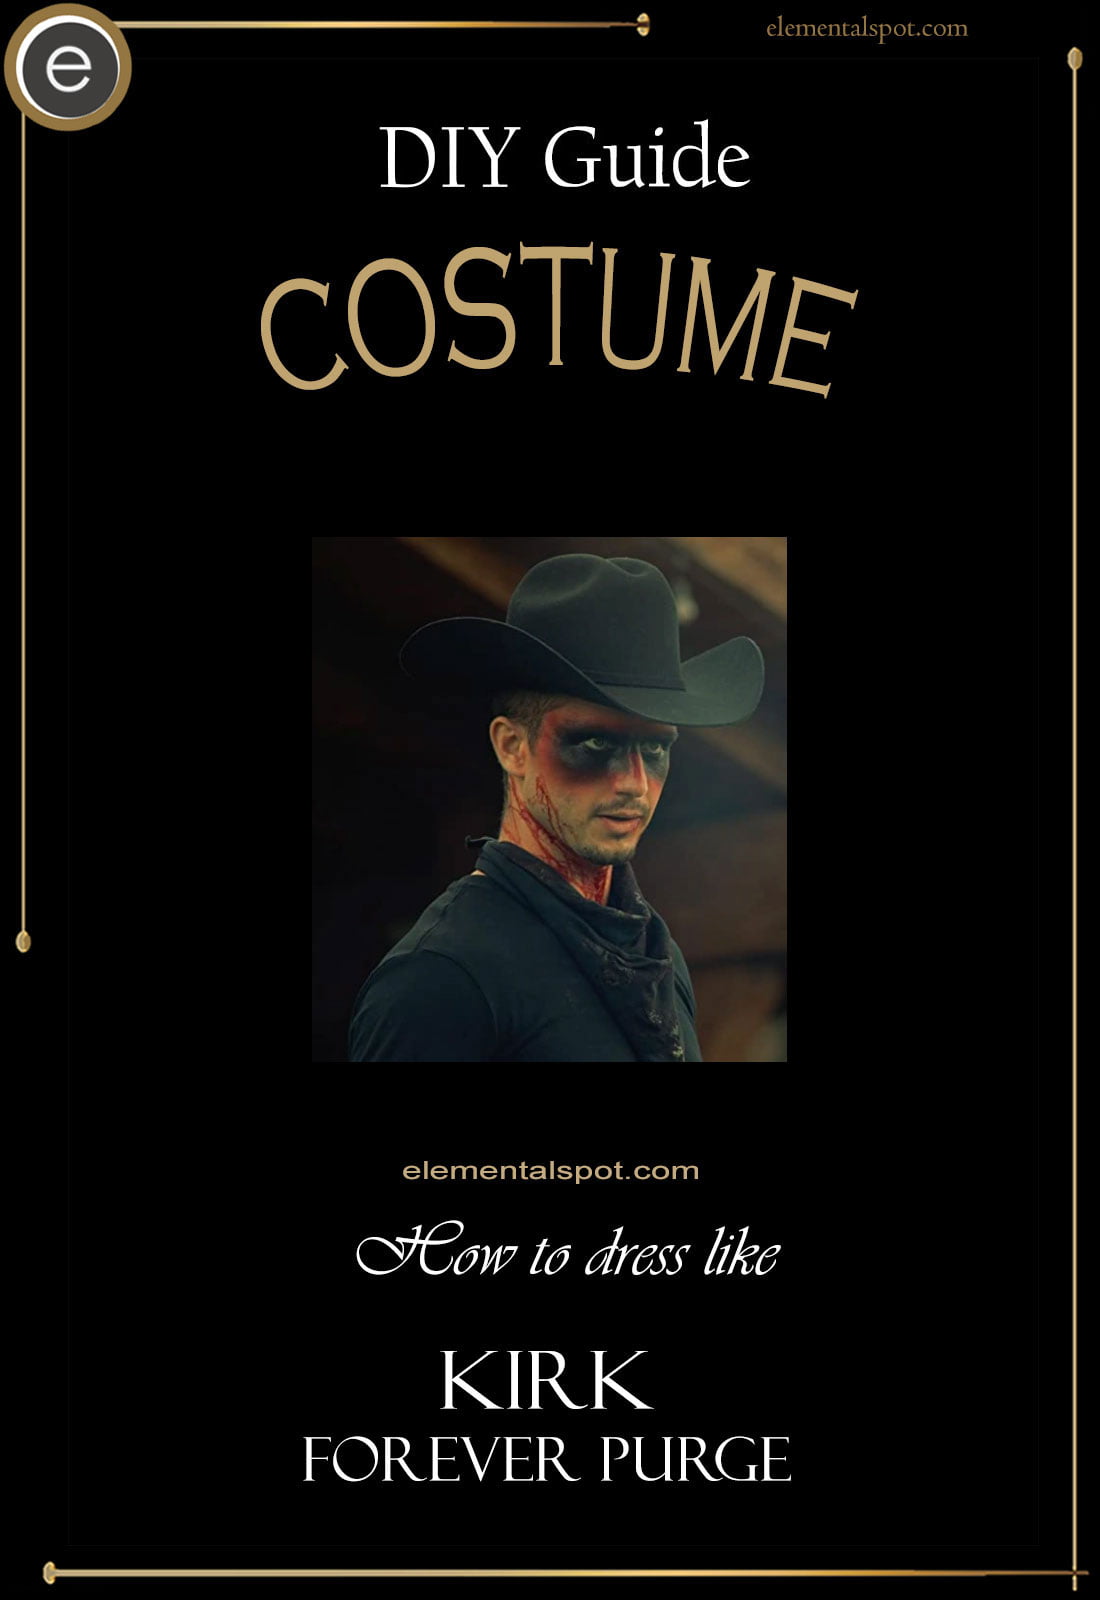 Dress Up Like Kirk from The Forever Purge - Elemental Spot